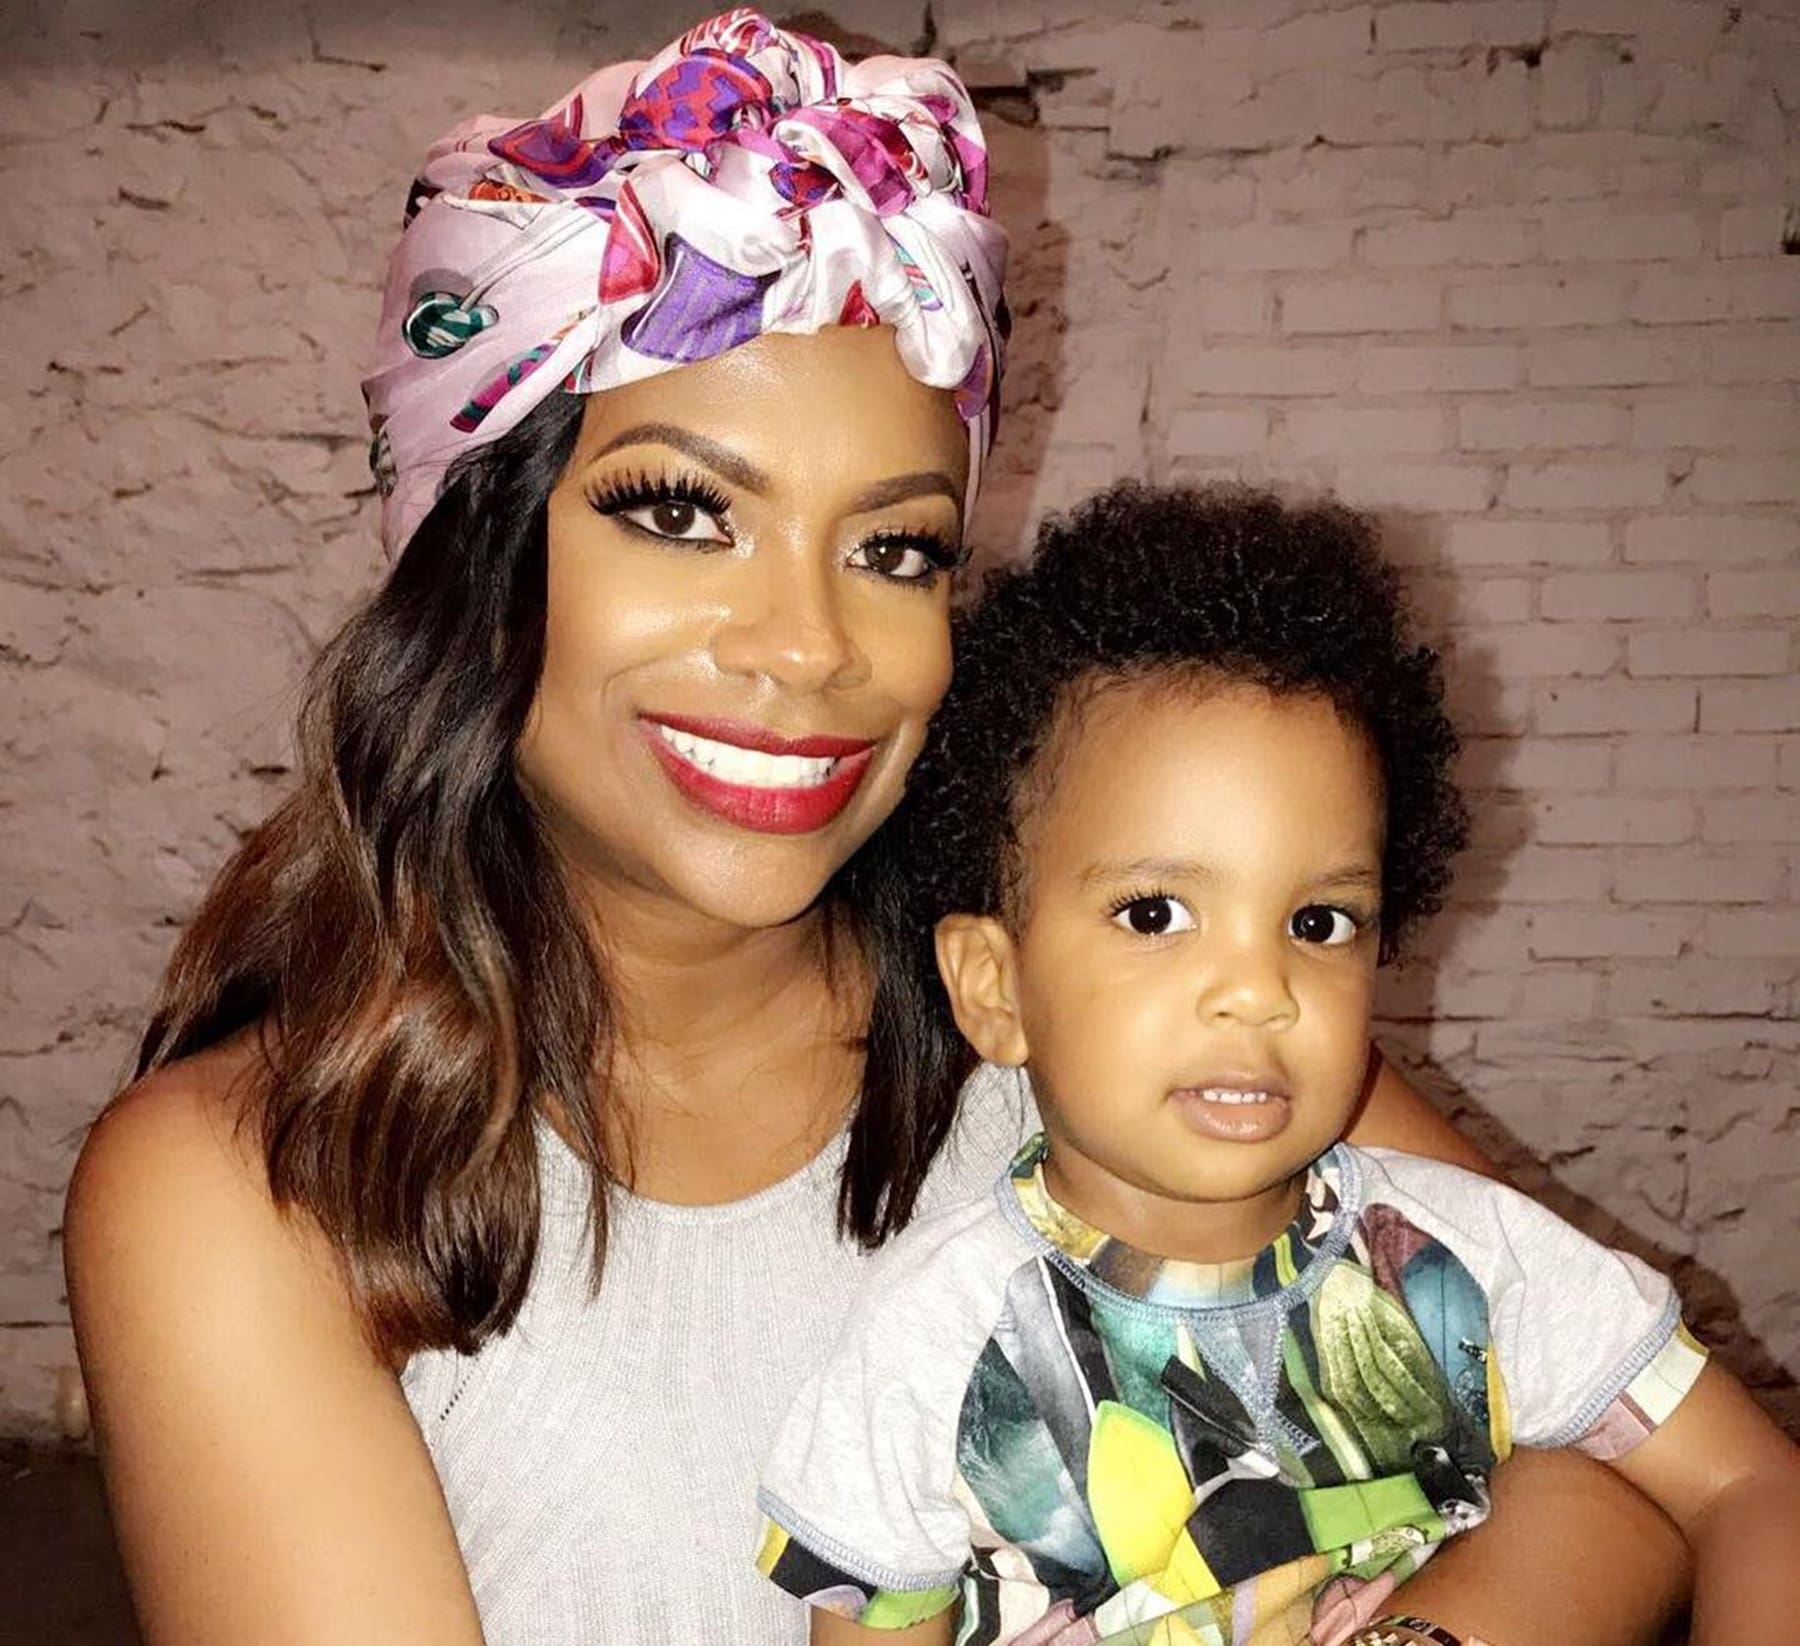 Kandi Burruss Celebrates Her Son's Birthday - Ace Wells Tucker Is 4 Years Old! Eva Marcille Also Marks The Event